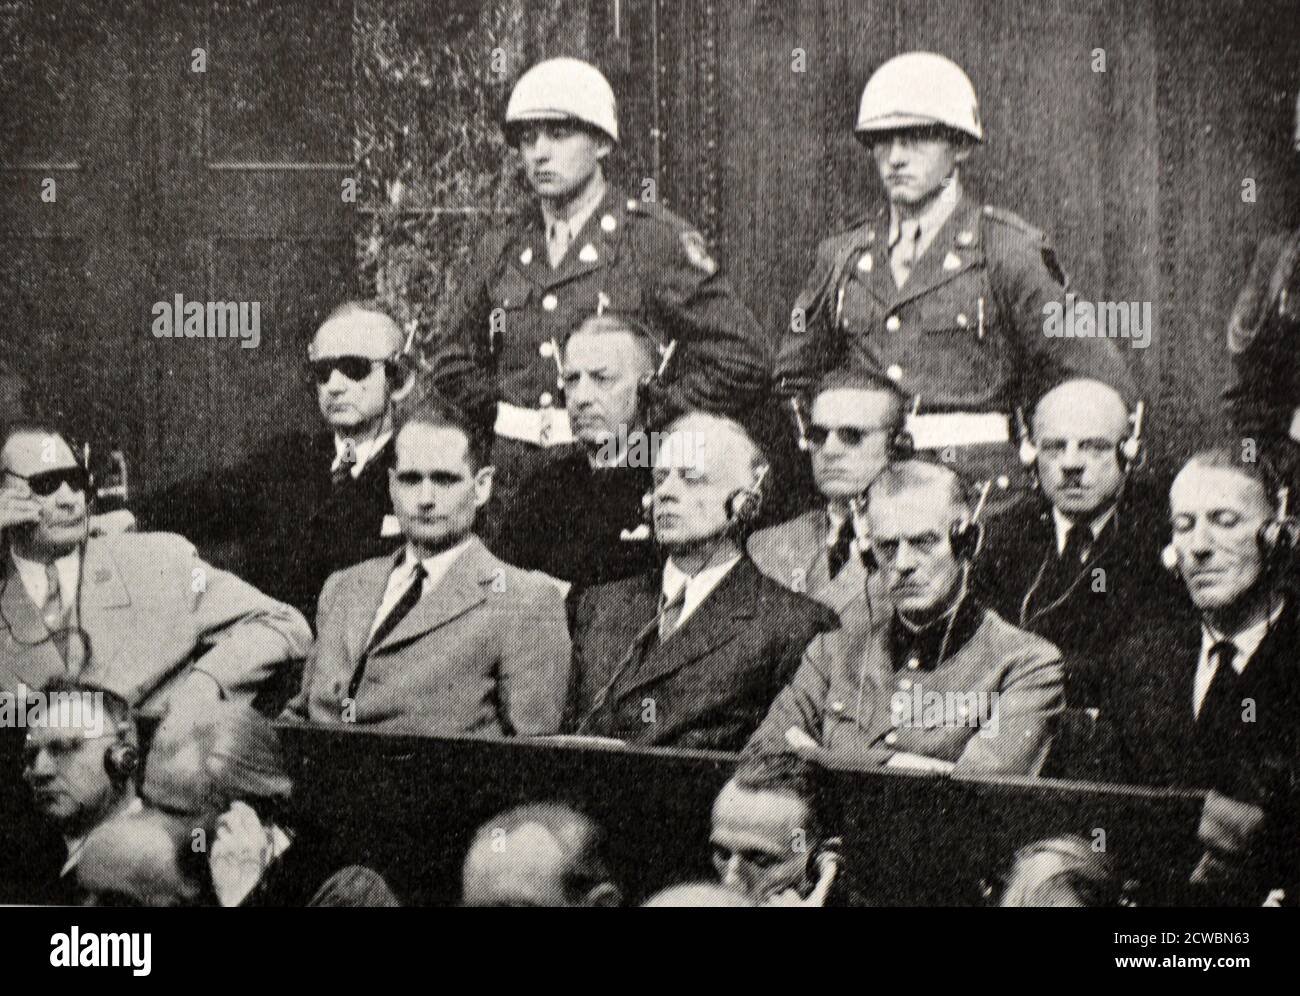 Black and white photograph of World War II (1939-1945) showing images related to the Nuremberg Trials, the largest prosecution in history, and which began in November 1945; a group of the accused awaiting trial in the Court of Justice: Goering, Hess, Ribbentrop, Keitel, Rosenberg, Doenitz, Raeder, Baldur von Schirach and Sauckel. Stock Photo